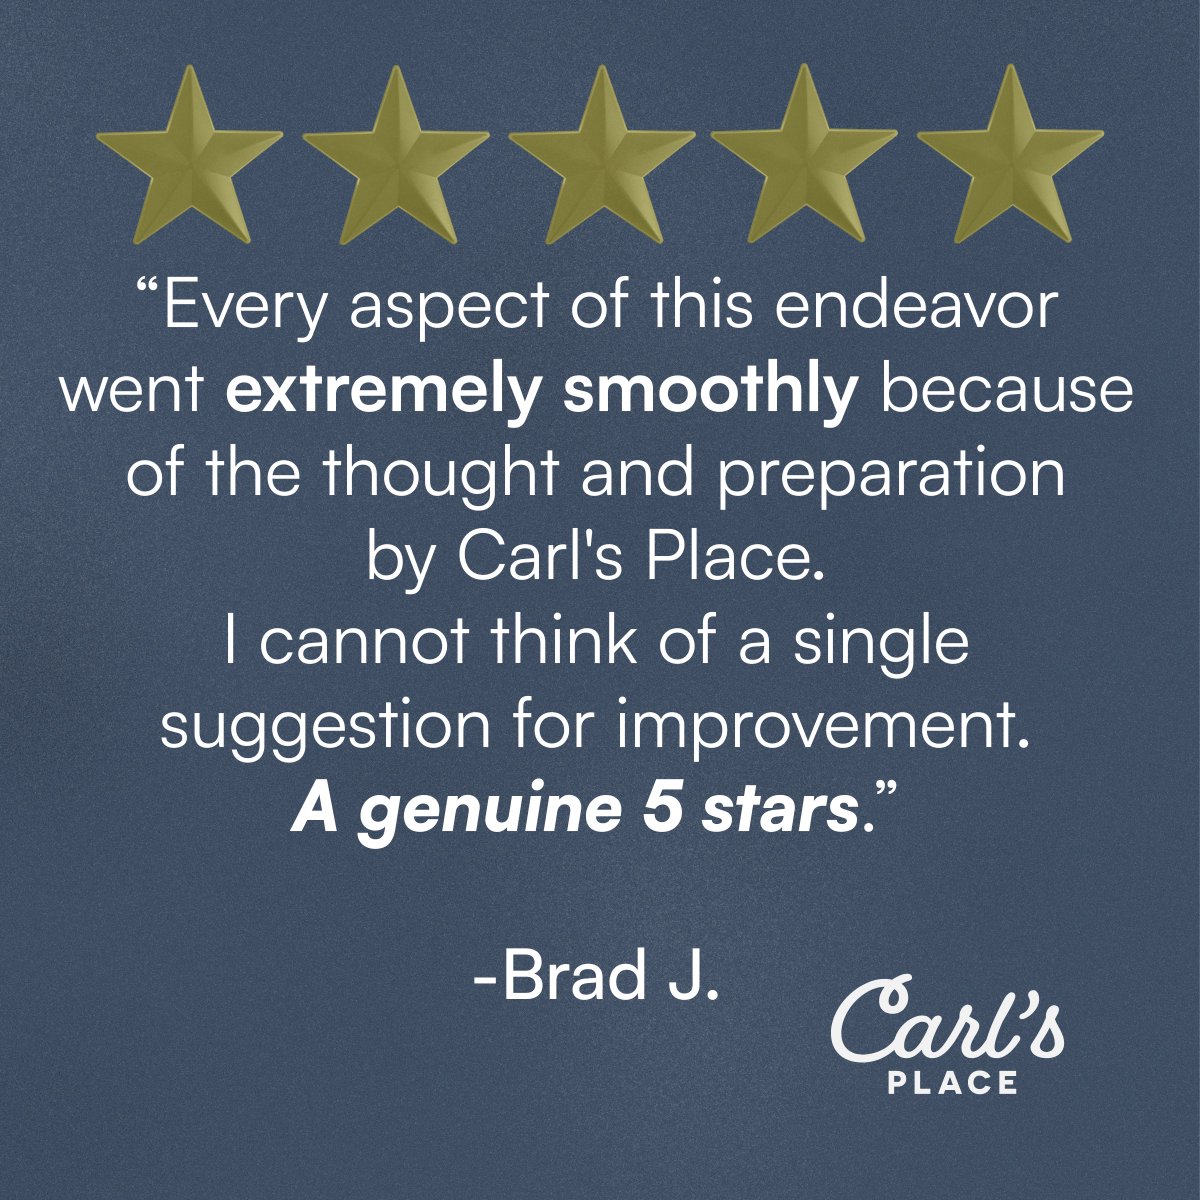 Now this is what we like to hear! #golf #golfsimulator #indoorgolf #mycarlsplace